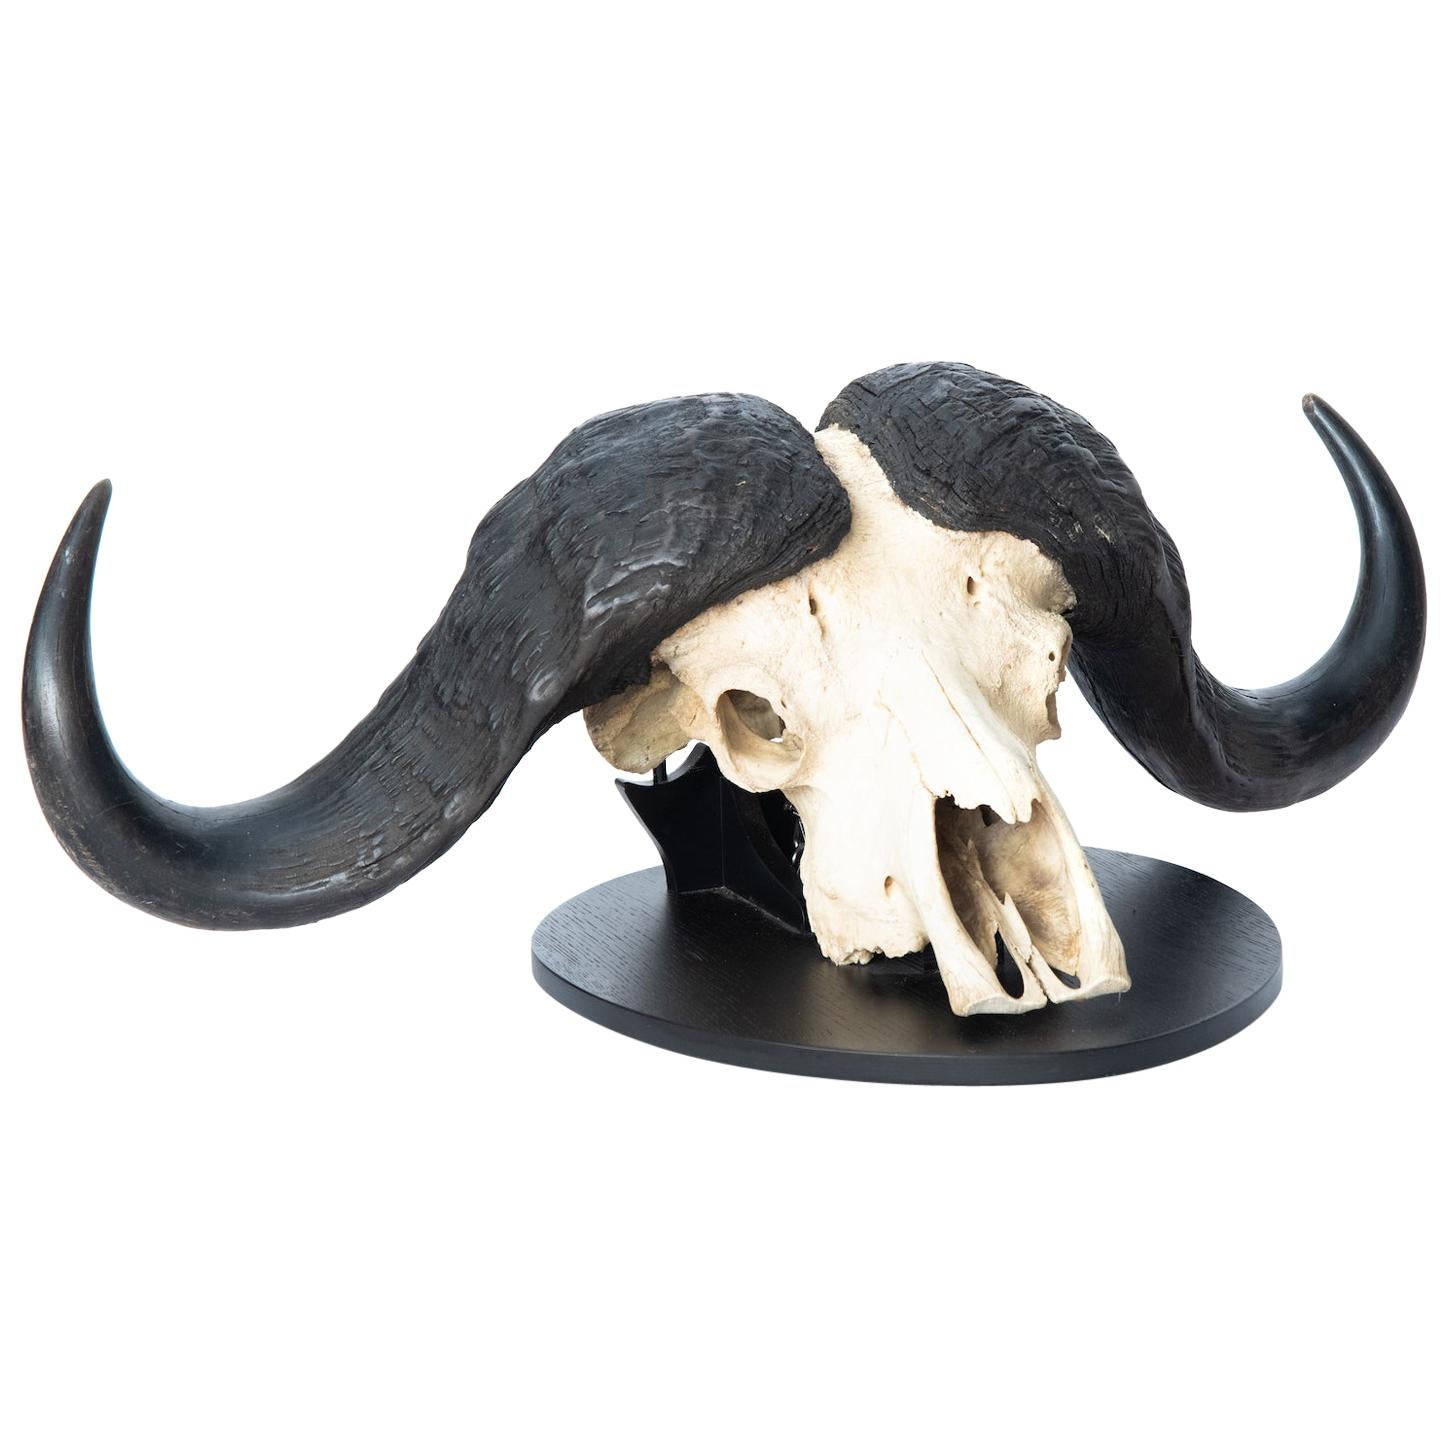 African Cape Buffalo Mount / Taxidermy with Full Skull & Horns Mounted on Plaque For Sale